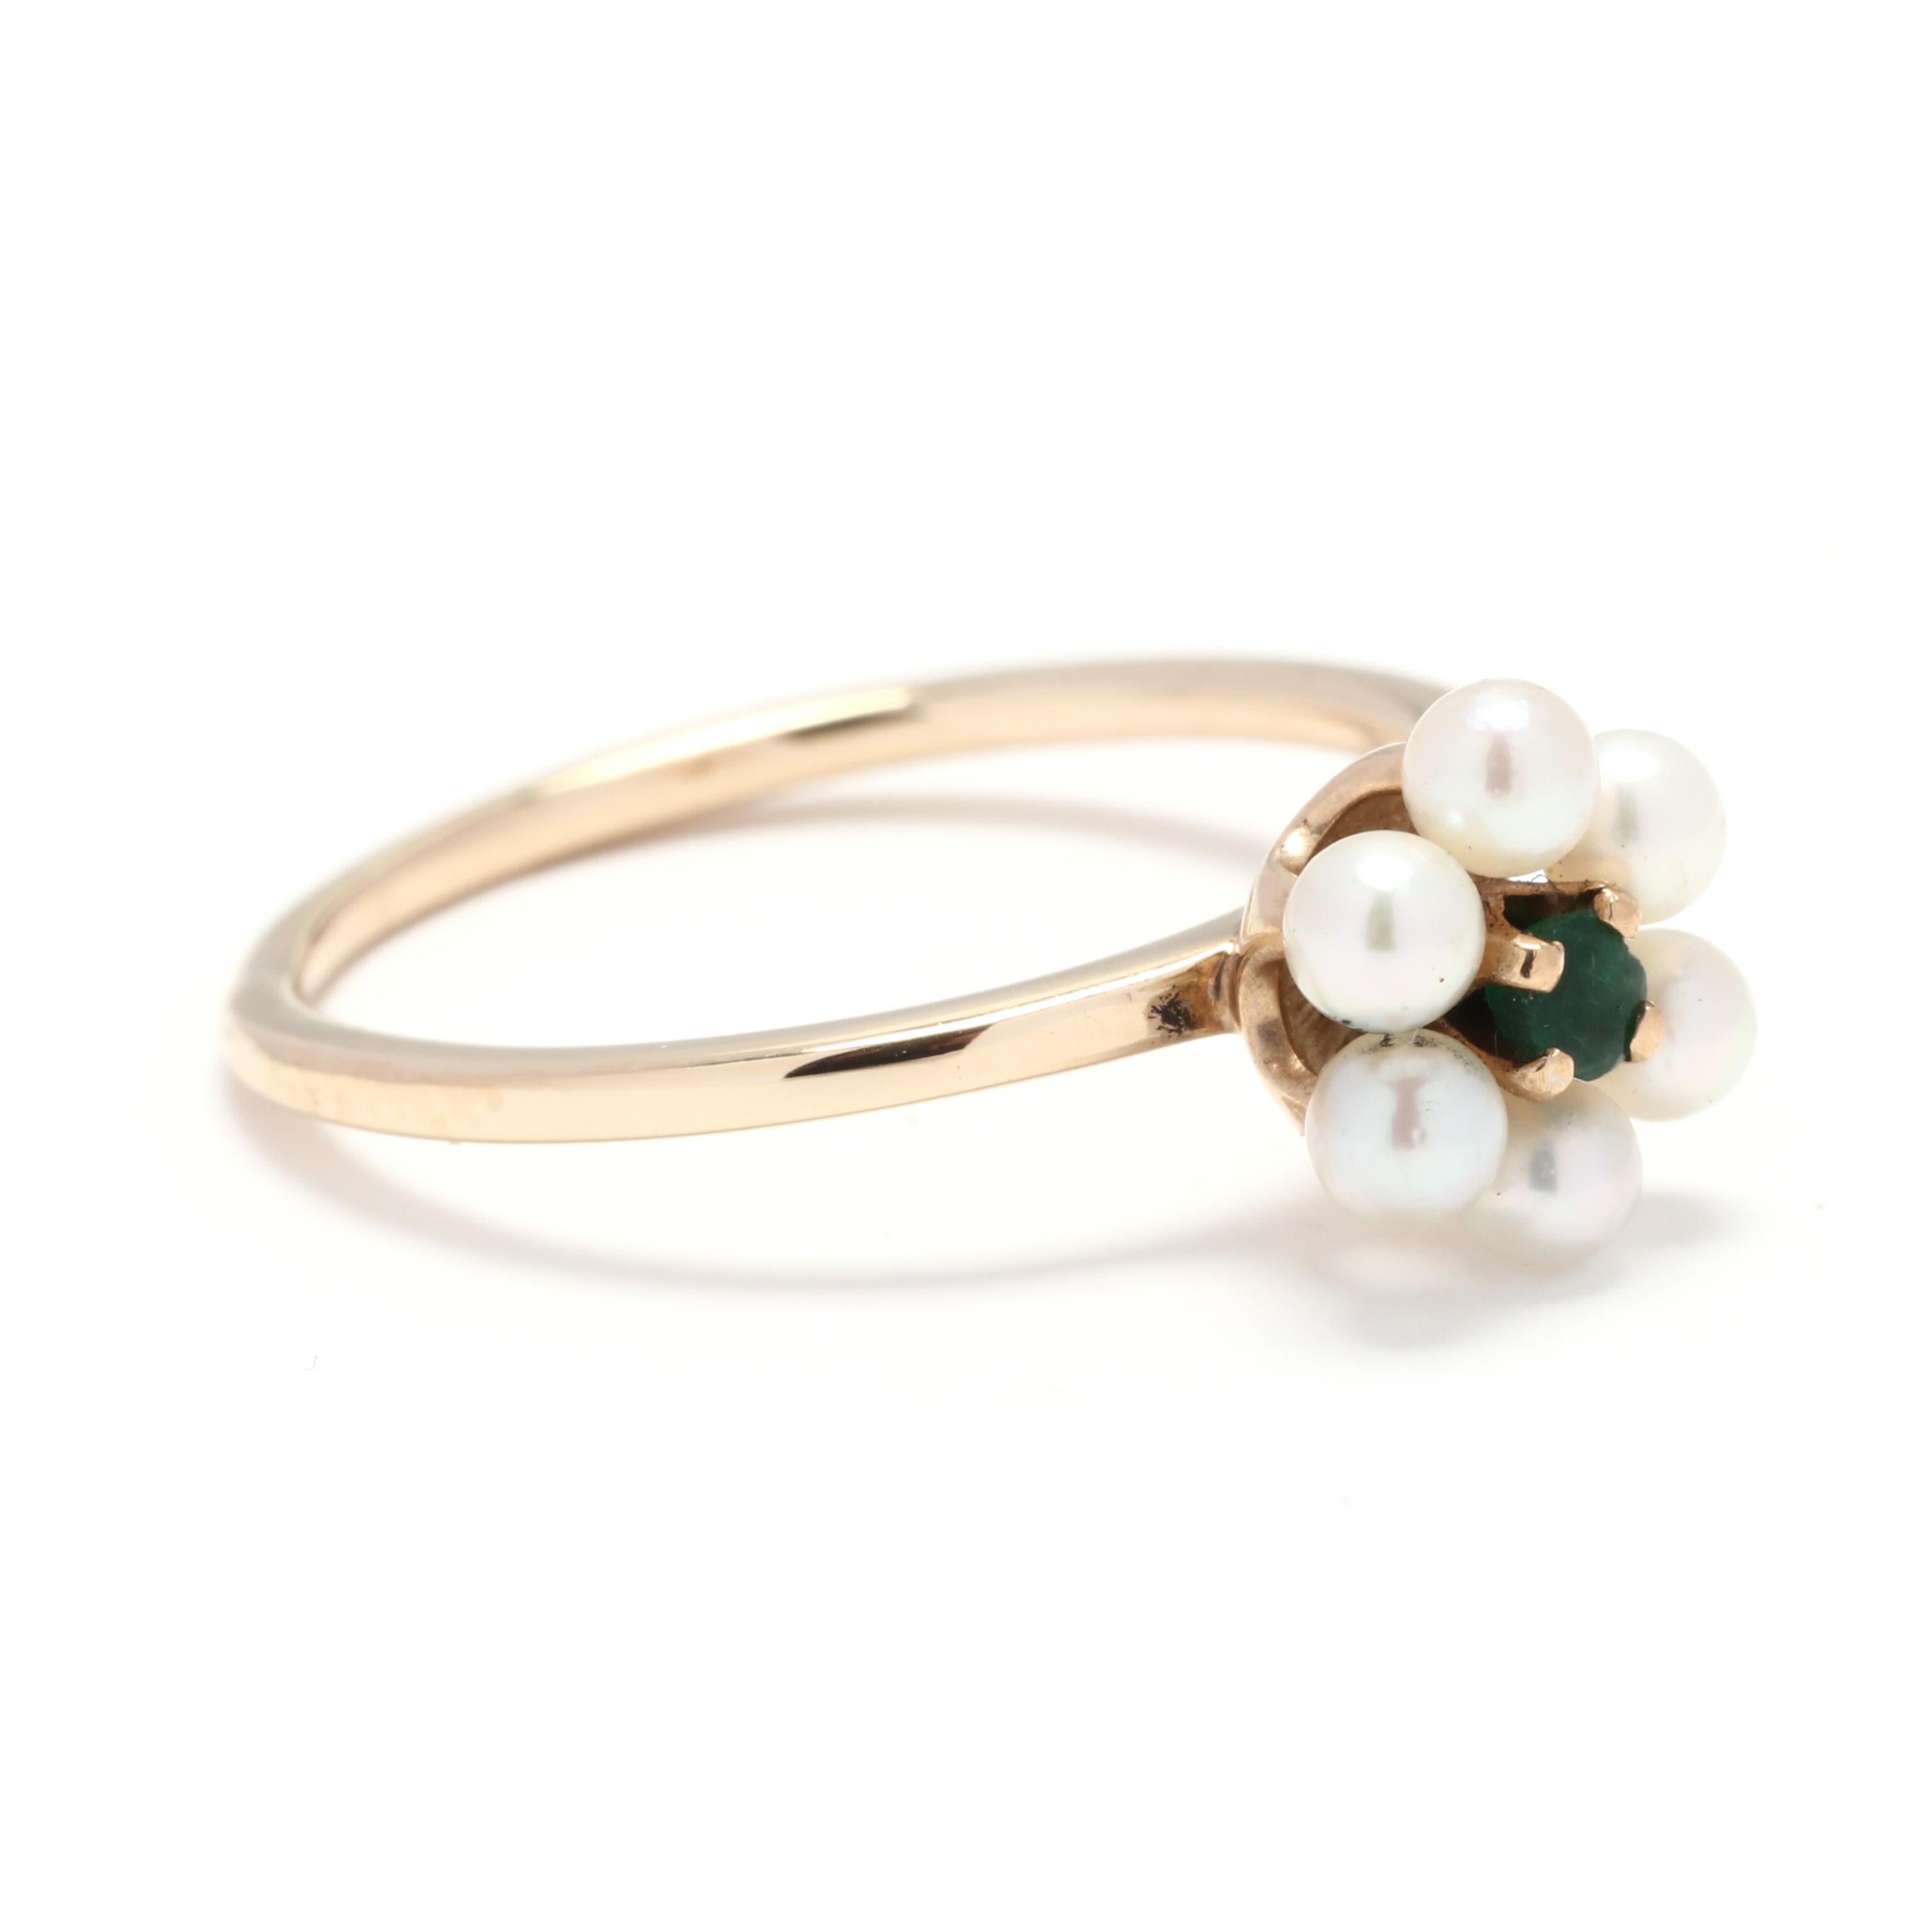 A 14 karat yellow gold, emerald and pearl flower ring. This ring is centered on a round cut emerald surrounded by a pearl halo to create a floral motif and set atop a thin band.

Stones:
- emerald, 1 stone
- round cut
- 2.75 mm

- pearls, 6 stones
-